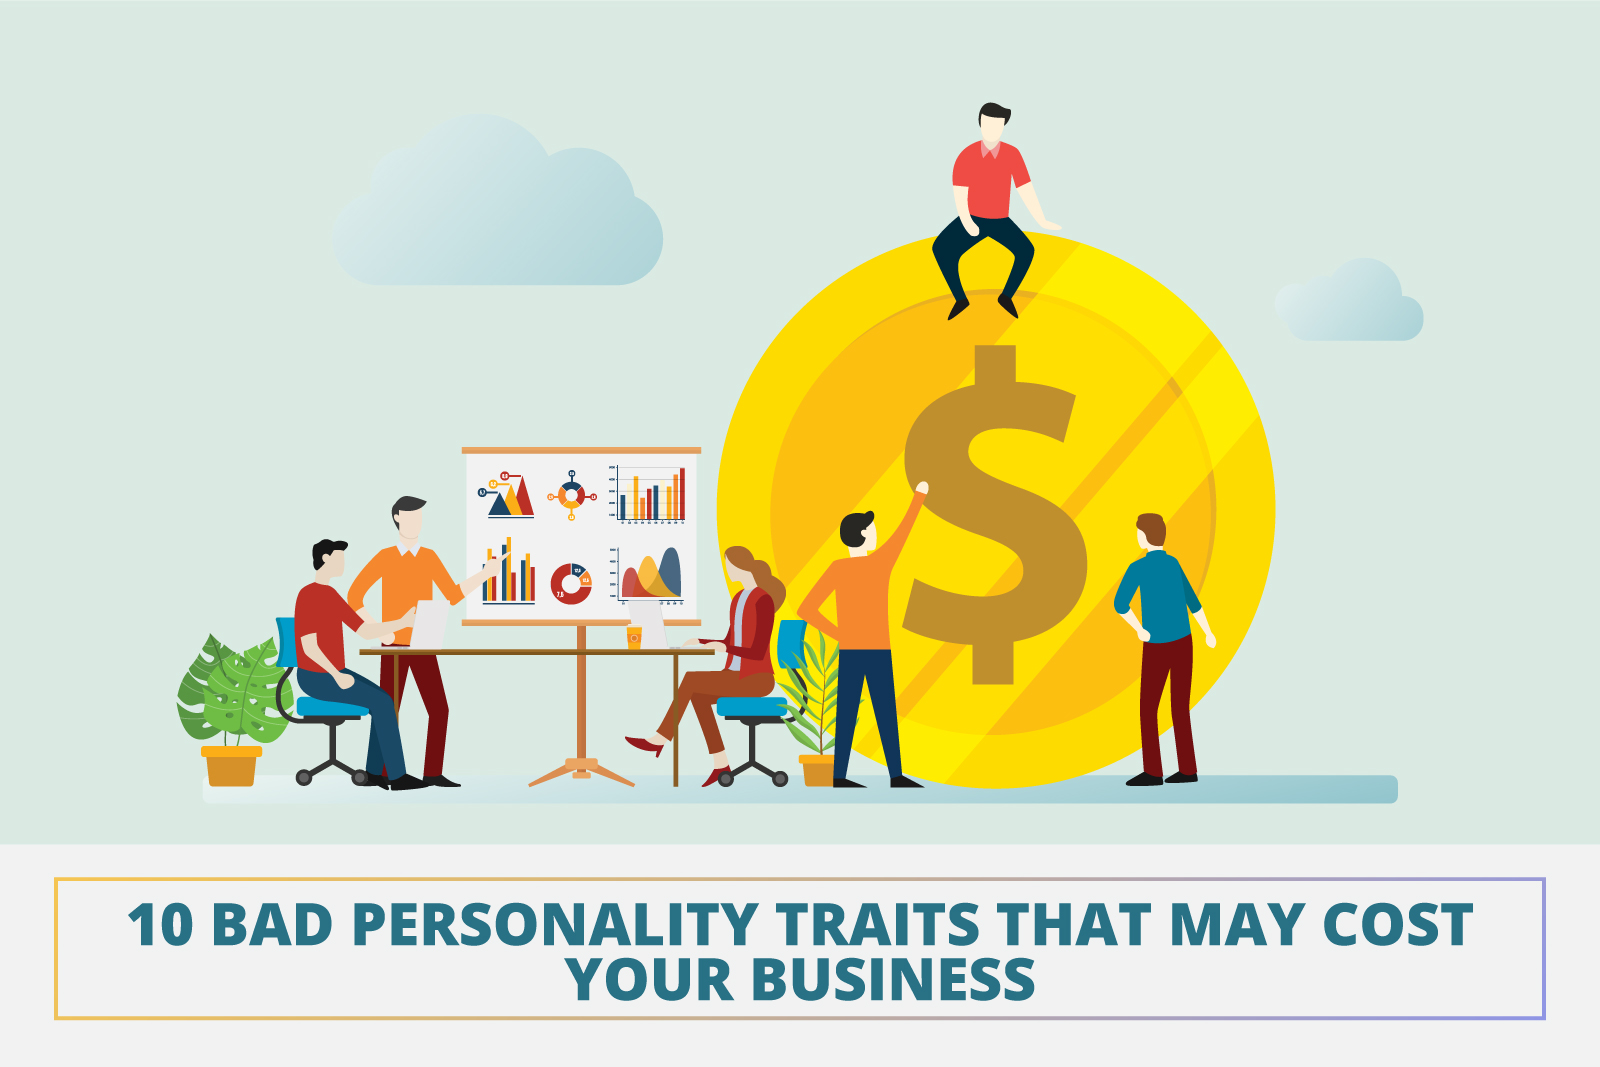 10 Bad Personality Traits That May Cost Your Business